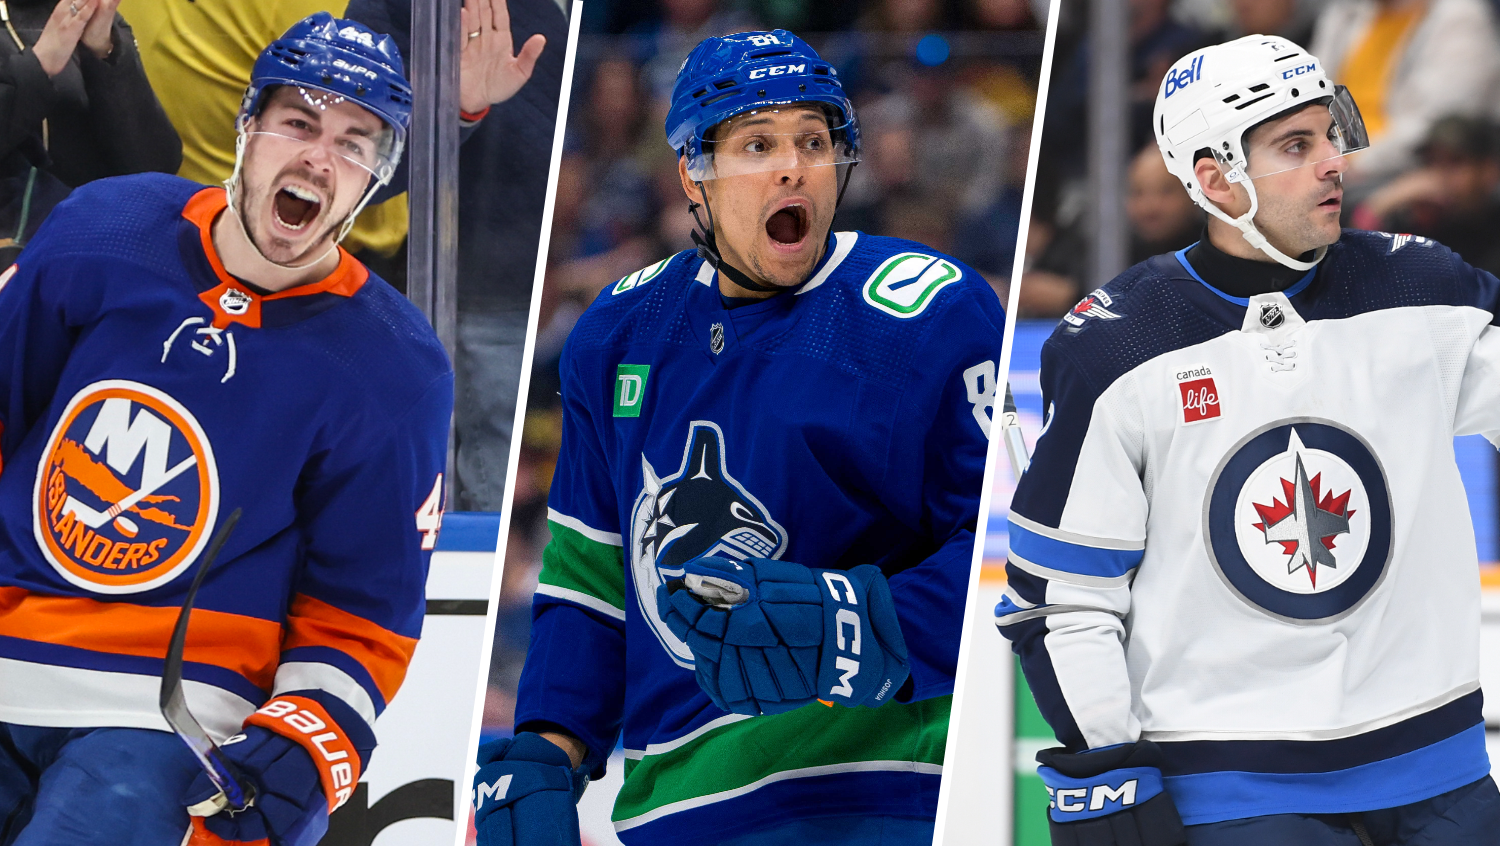 Four areas Sharks should address through free agency, trades